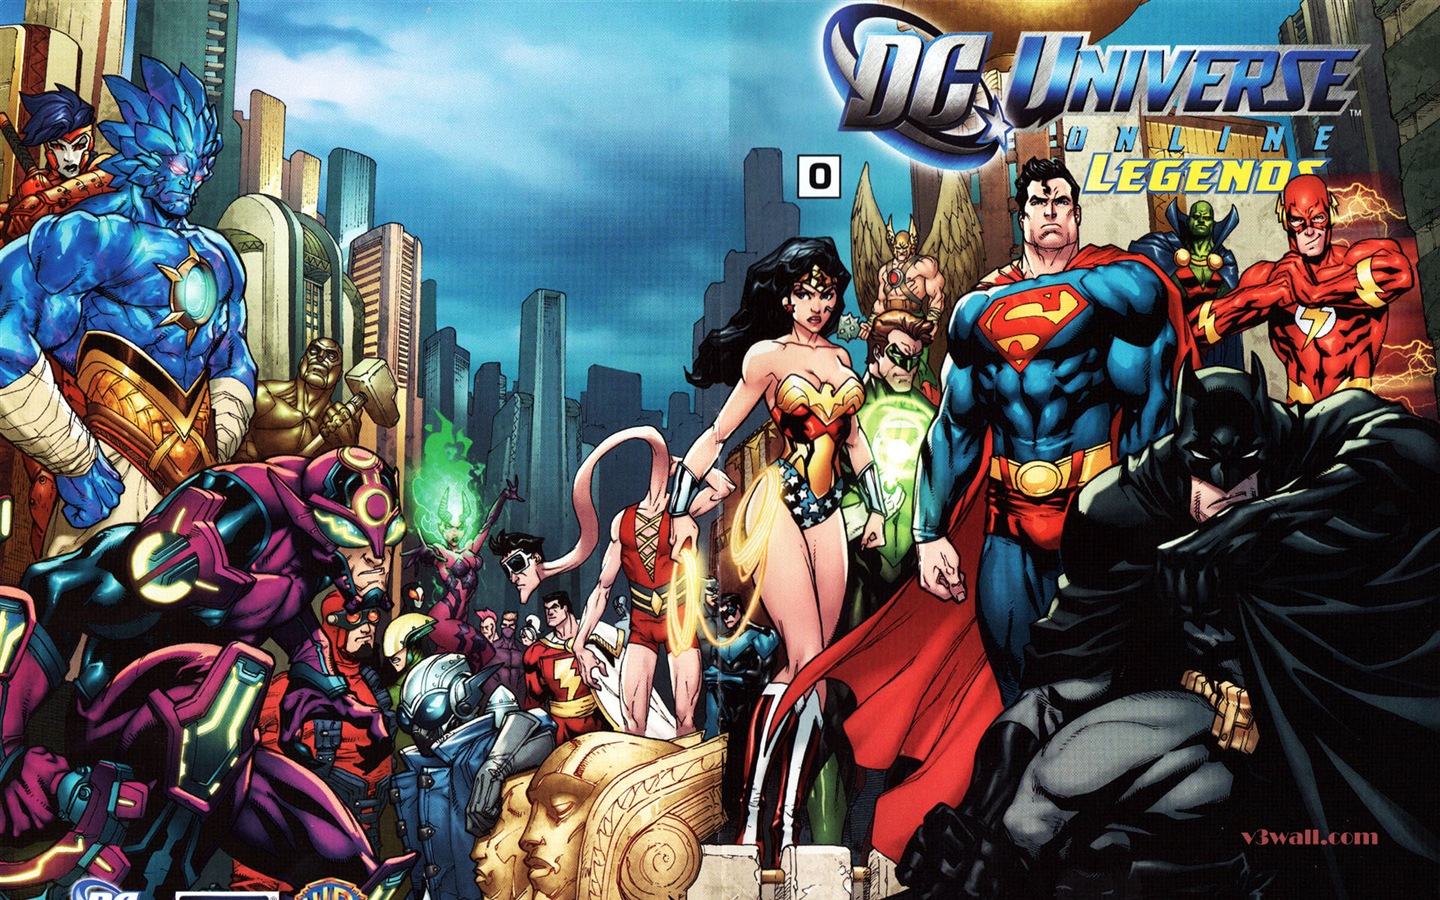 DC Universe Online HD game wallpapers #24 - 1440x900